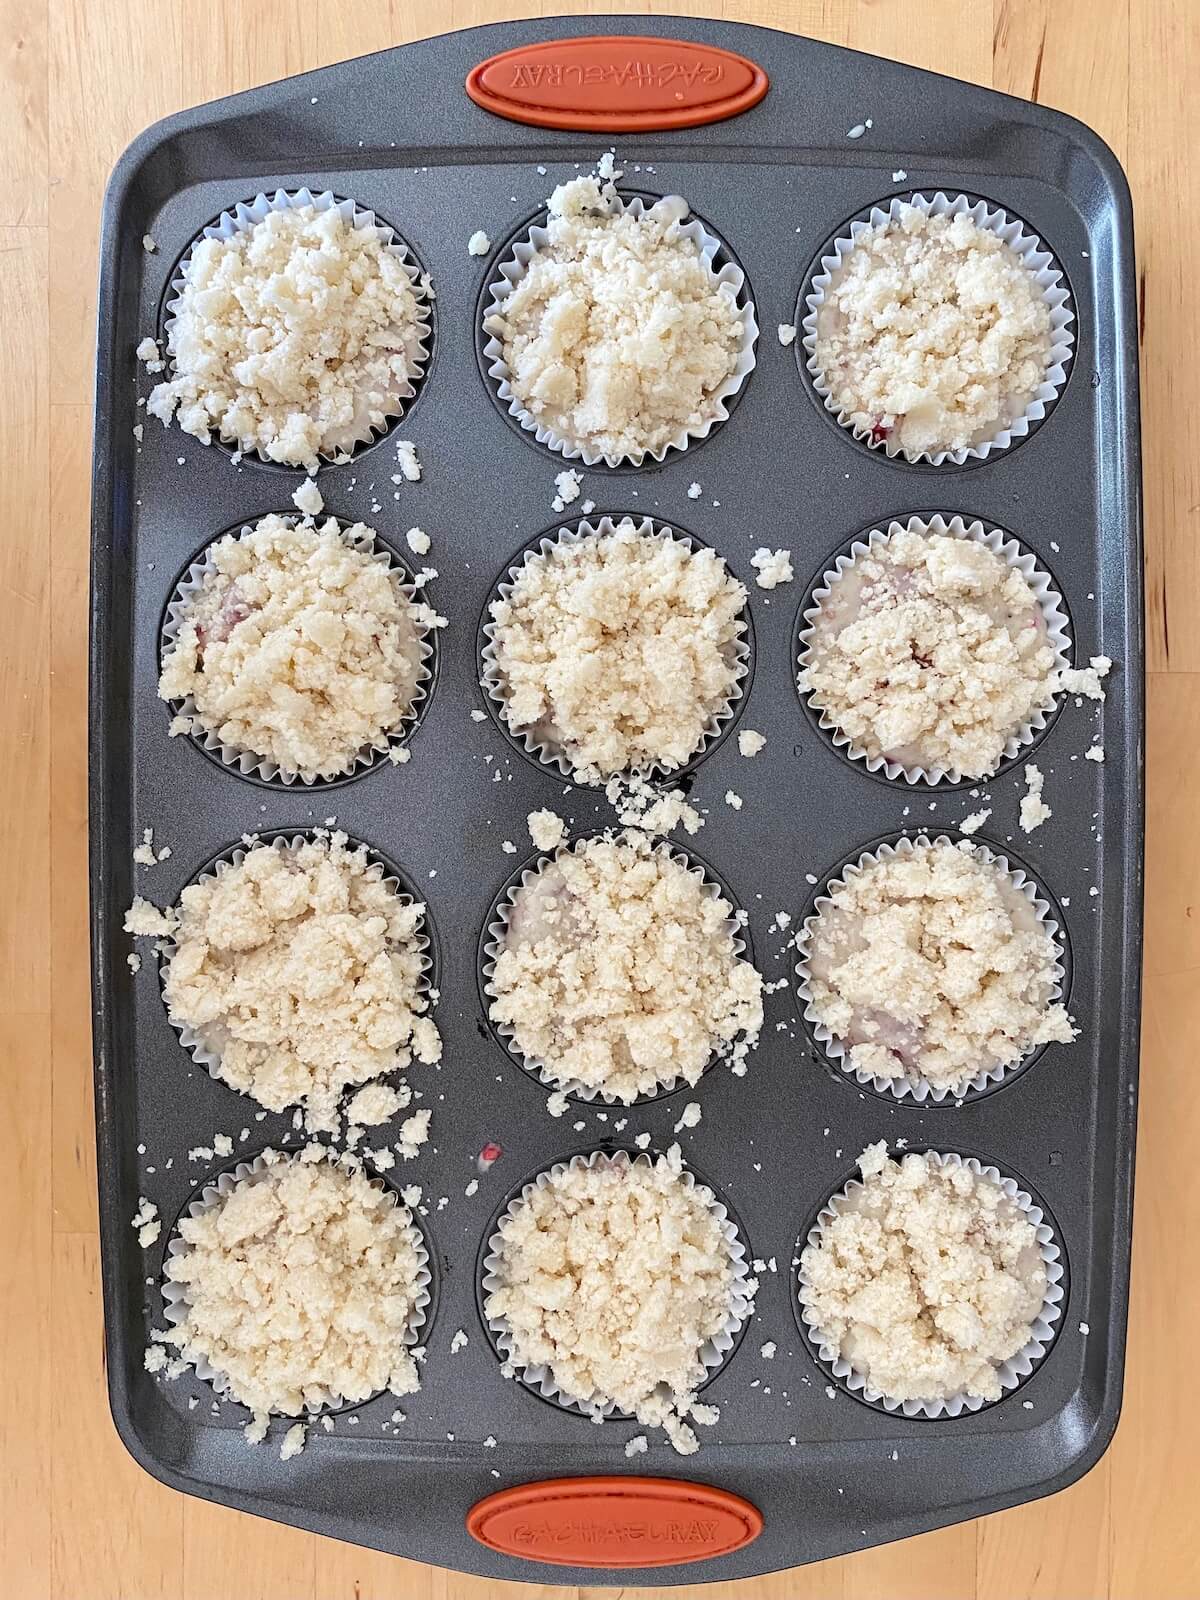 A 12-cup muffin tin filled with vegan raspberry muffin batter. Each muffin well is topped with streusel crumble.